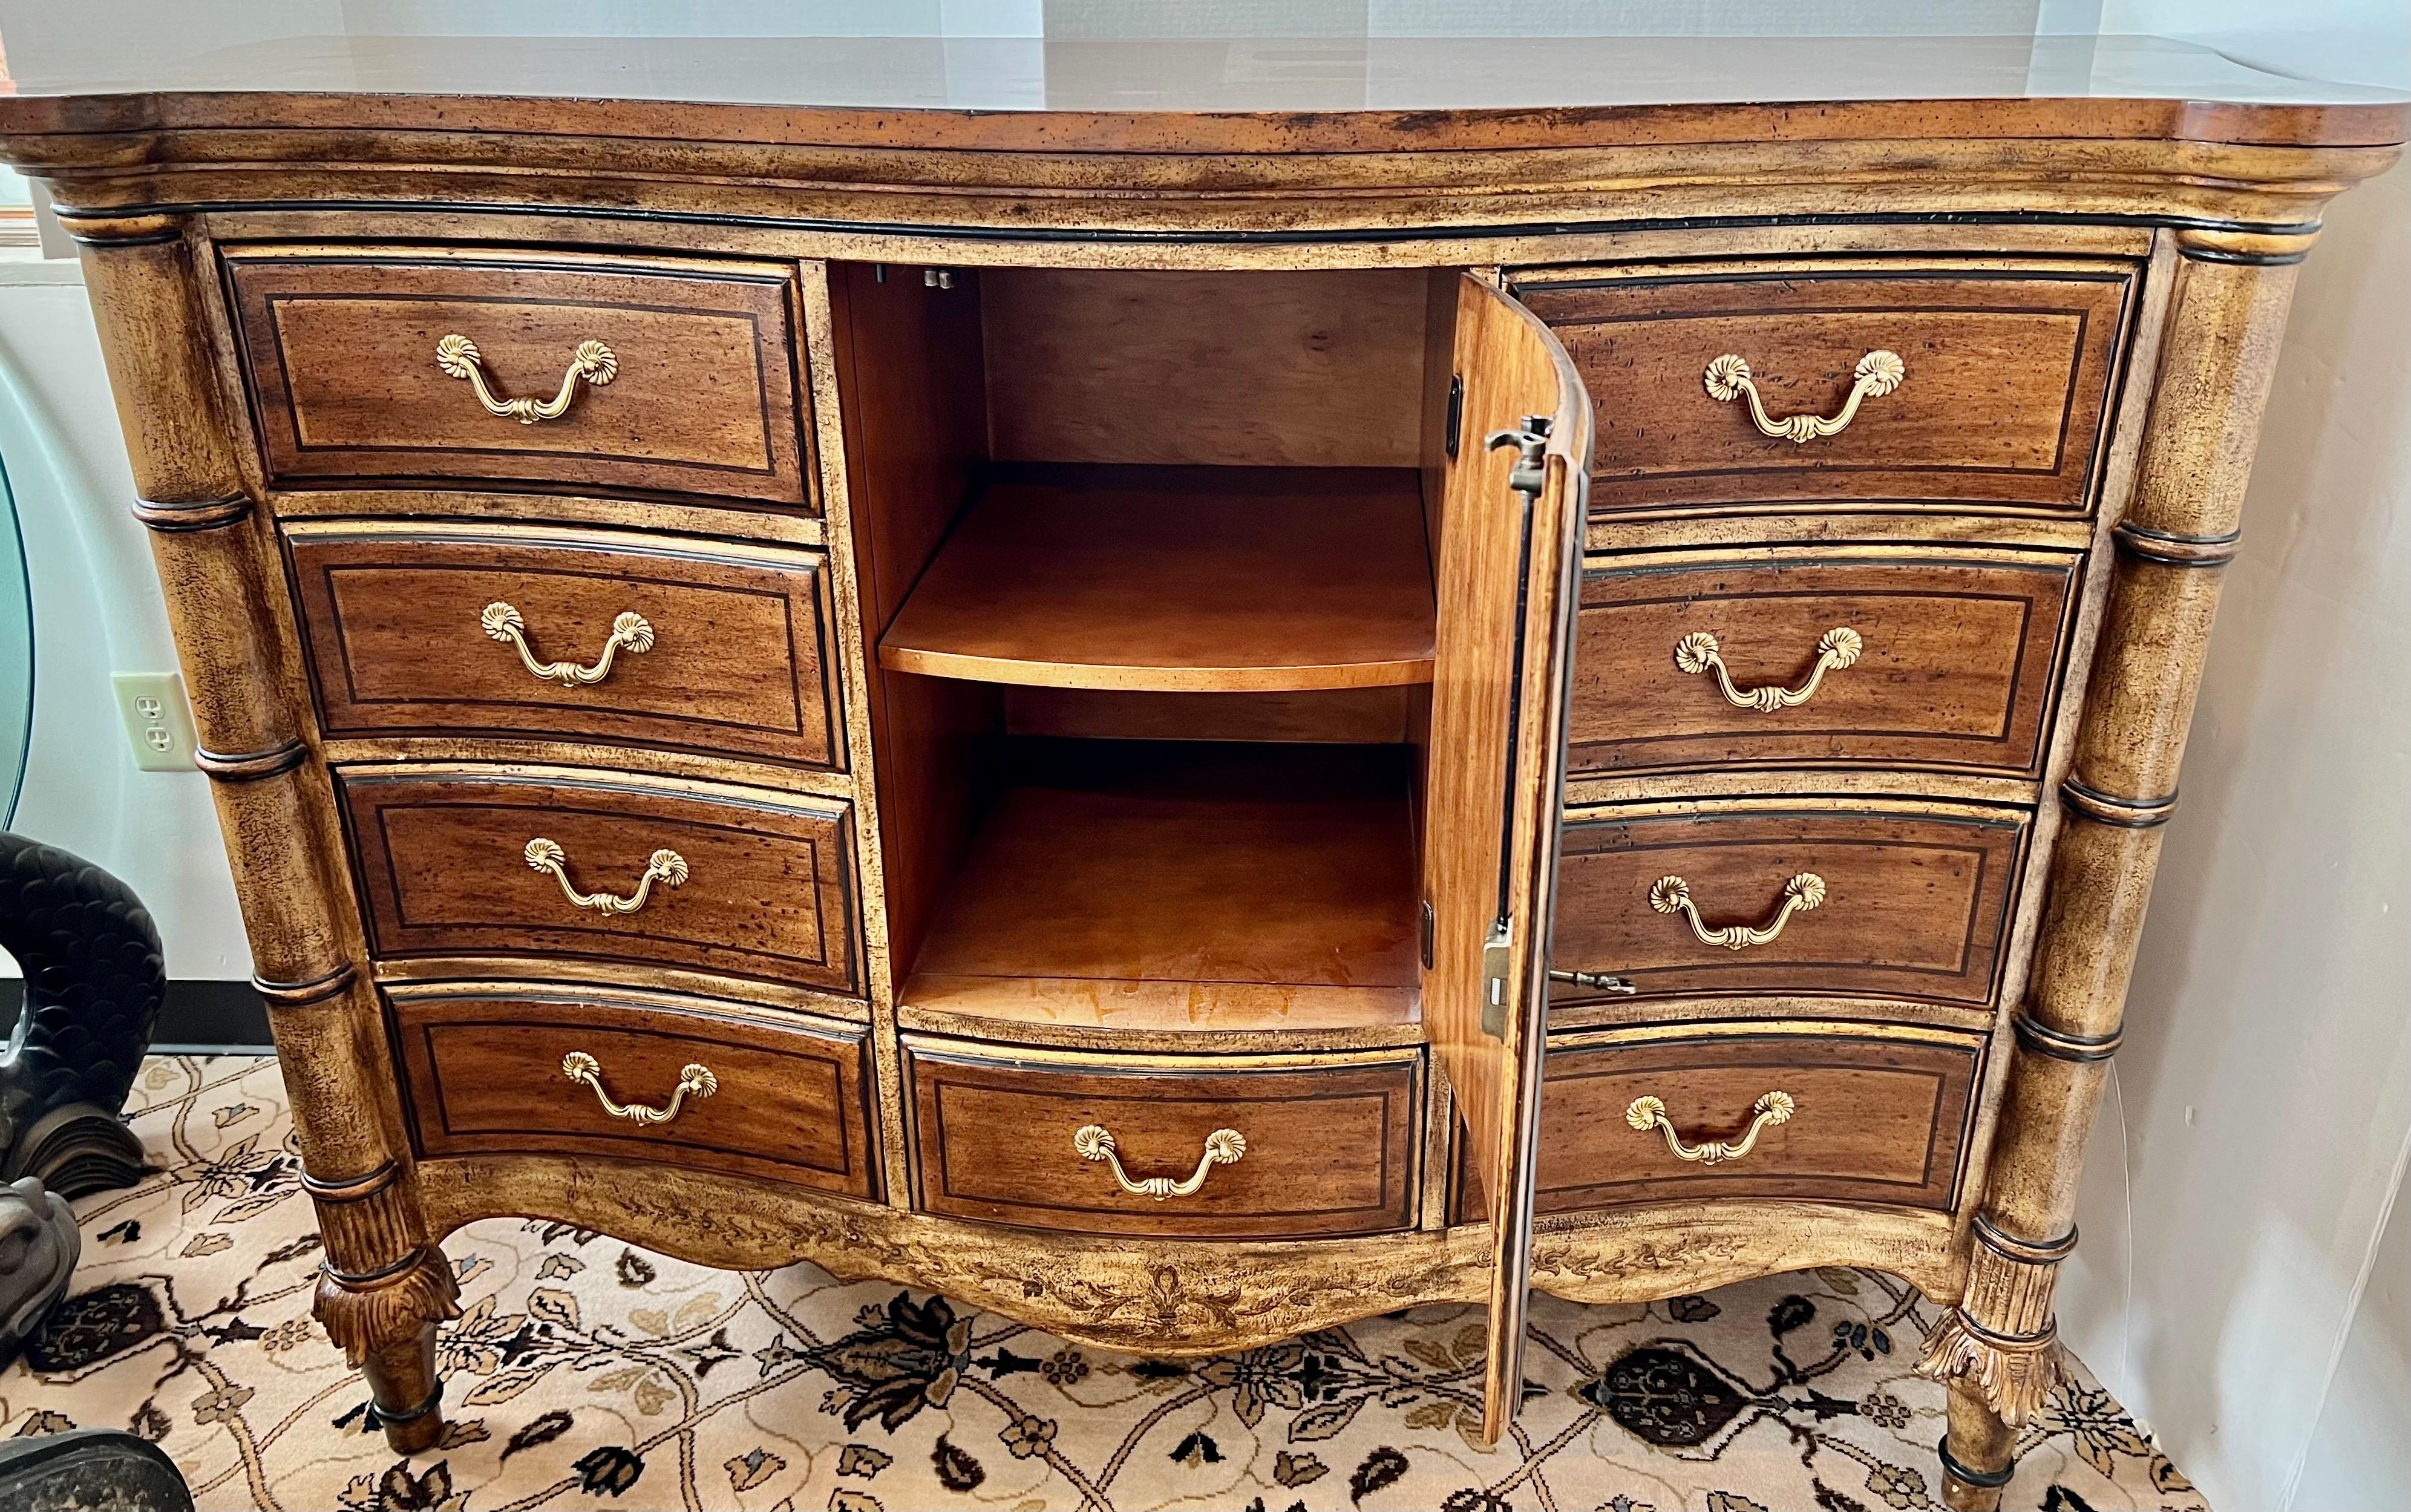 Elegant multi-purpose Ferguson Copeland Venetian dresser or sideboard by Ferguson Copeland. It has a bowed front between cylindrical legs with ring accents ending on carved feet. It has a center door with painted gold and black scrolled border,